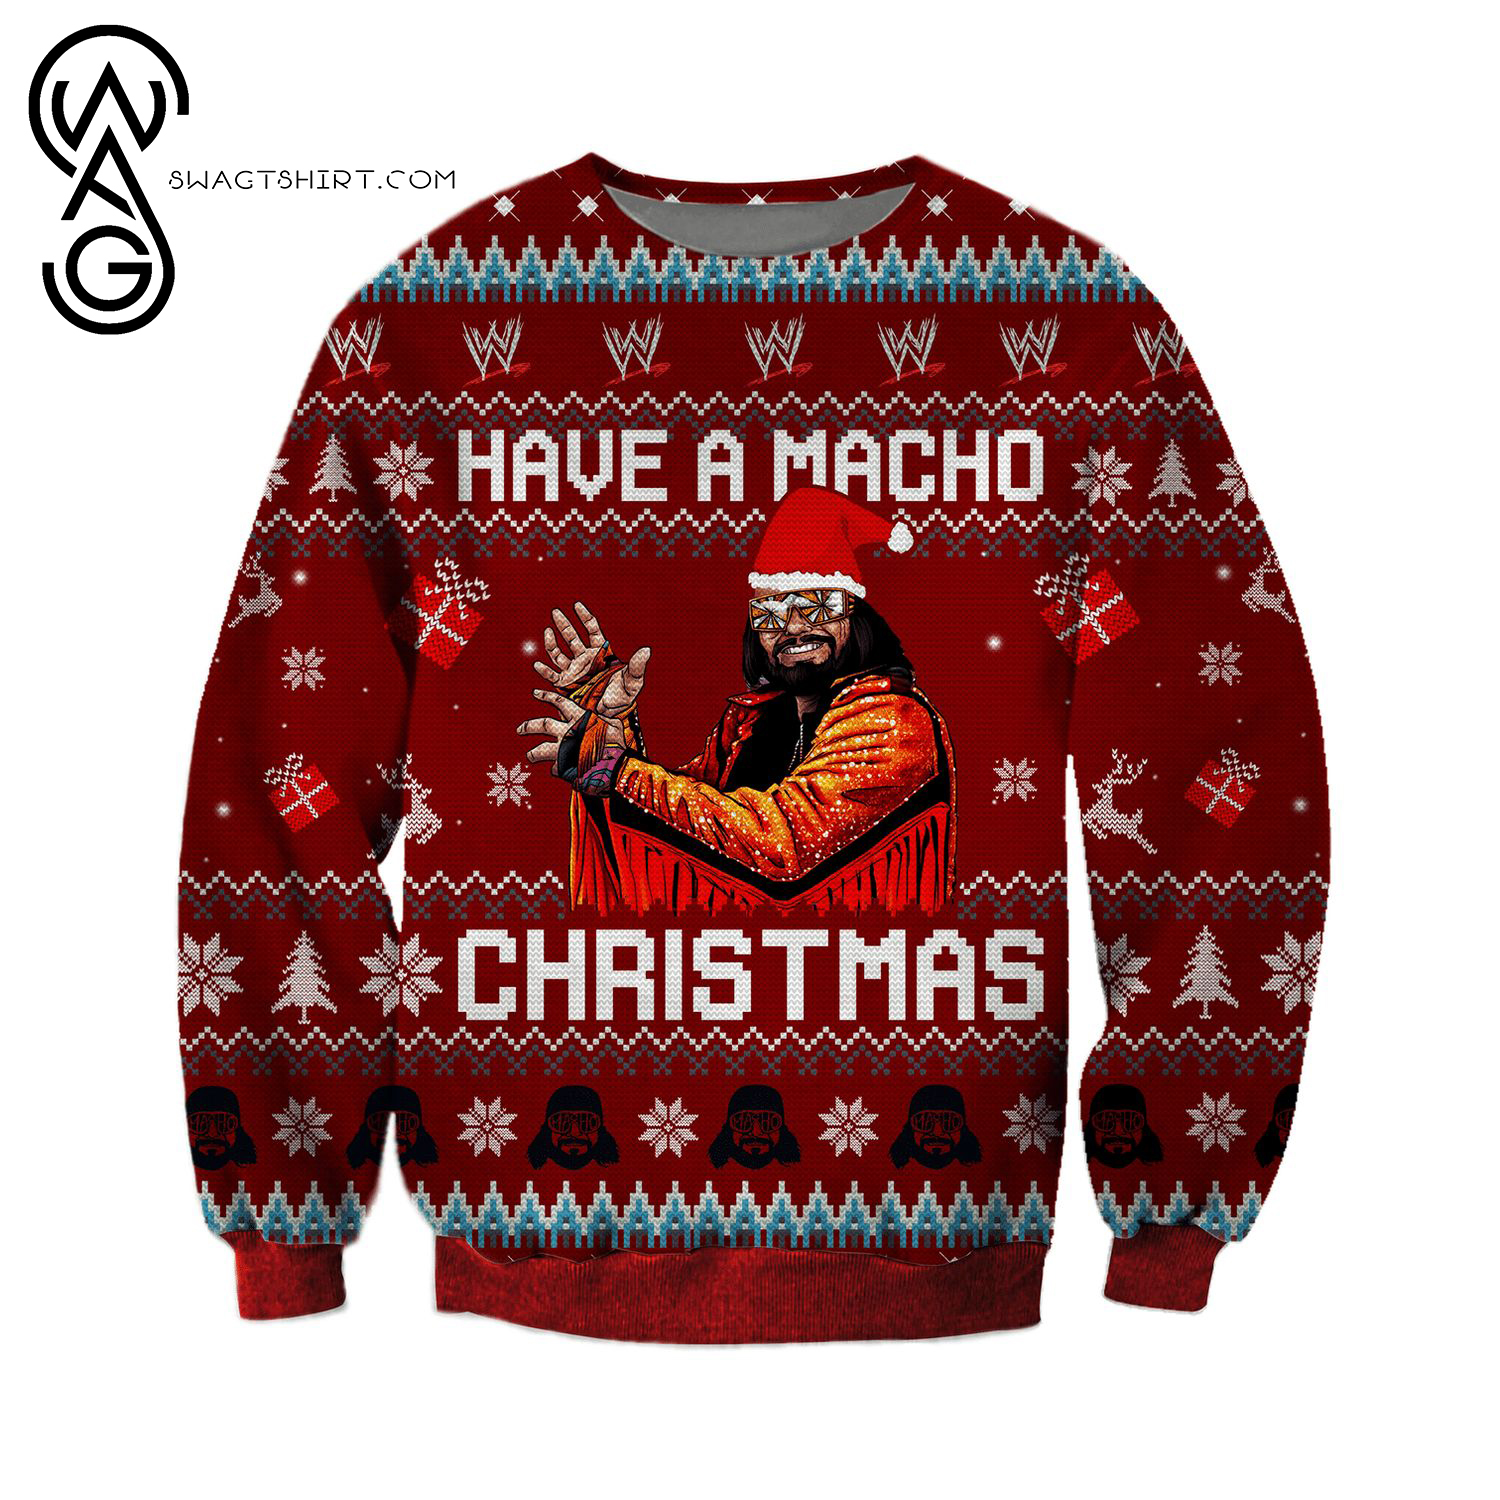 Have A Macho Christmas Full Print Ugly Christmas Sweater